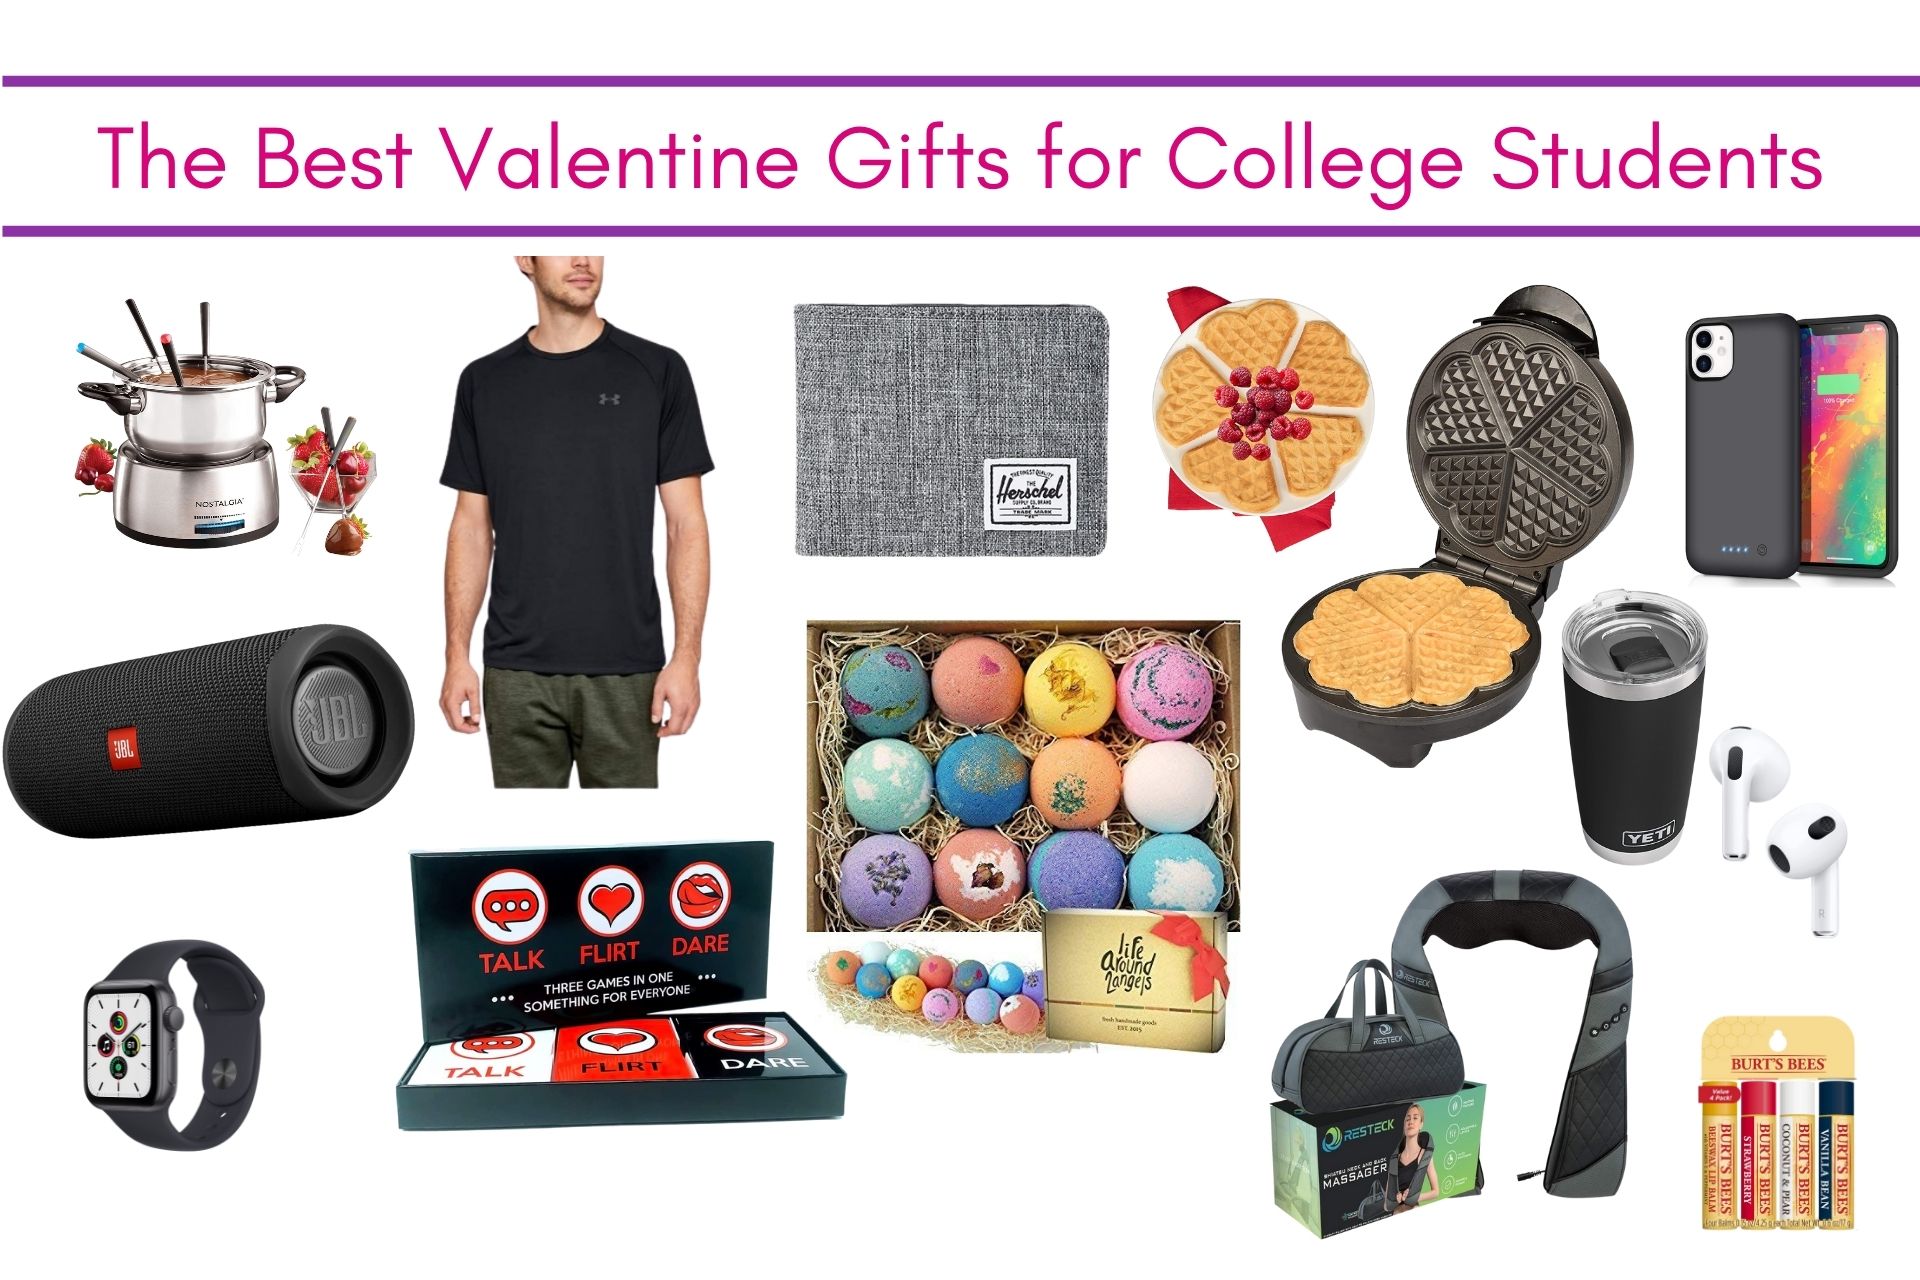 pictures of products that would make good valentine gifts for college students